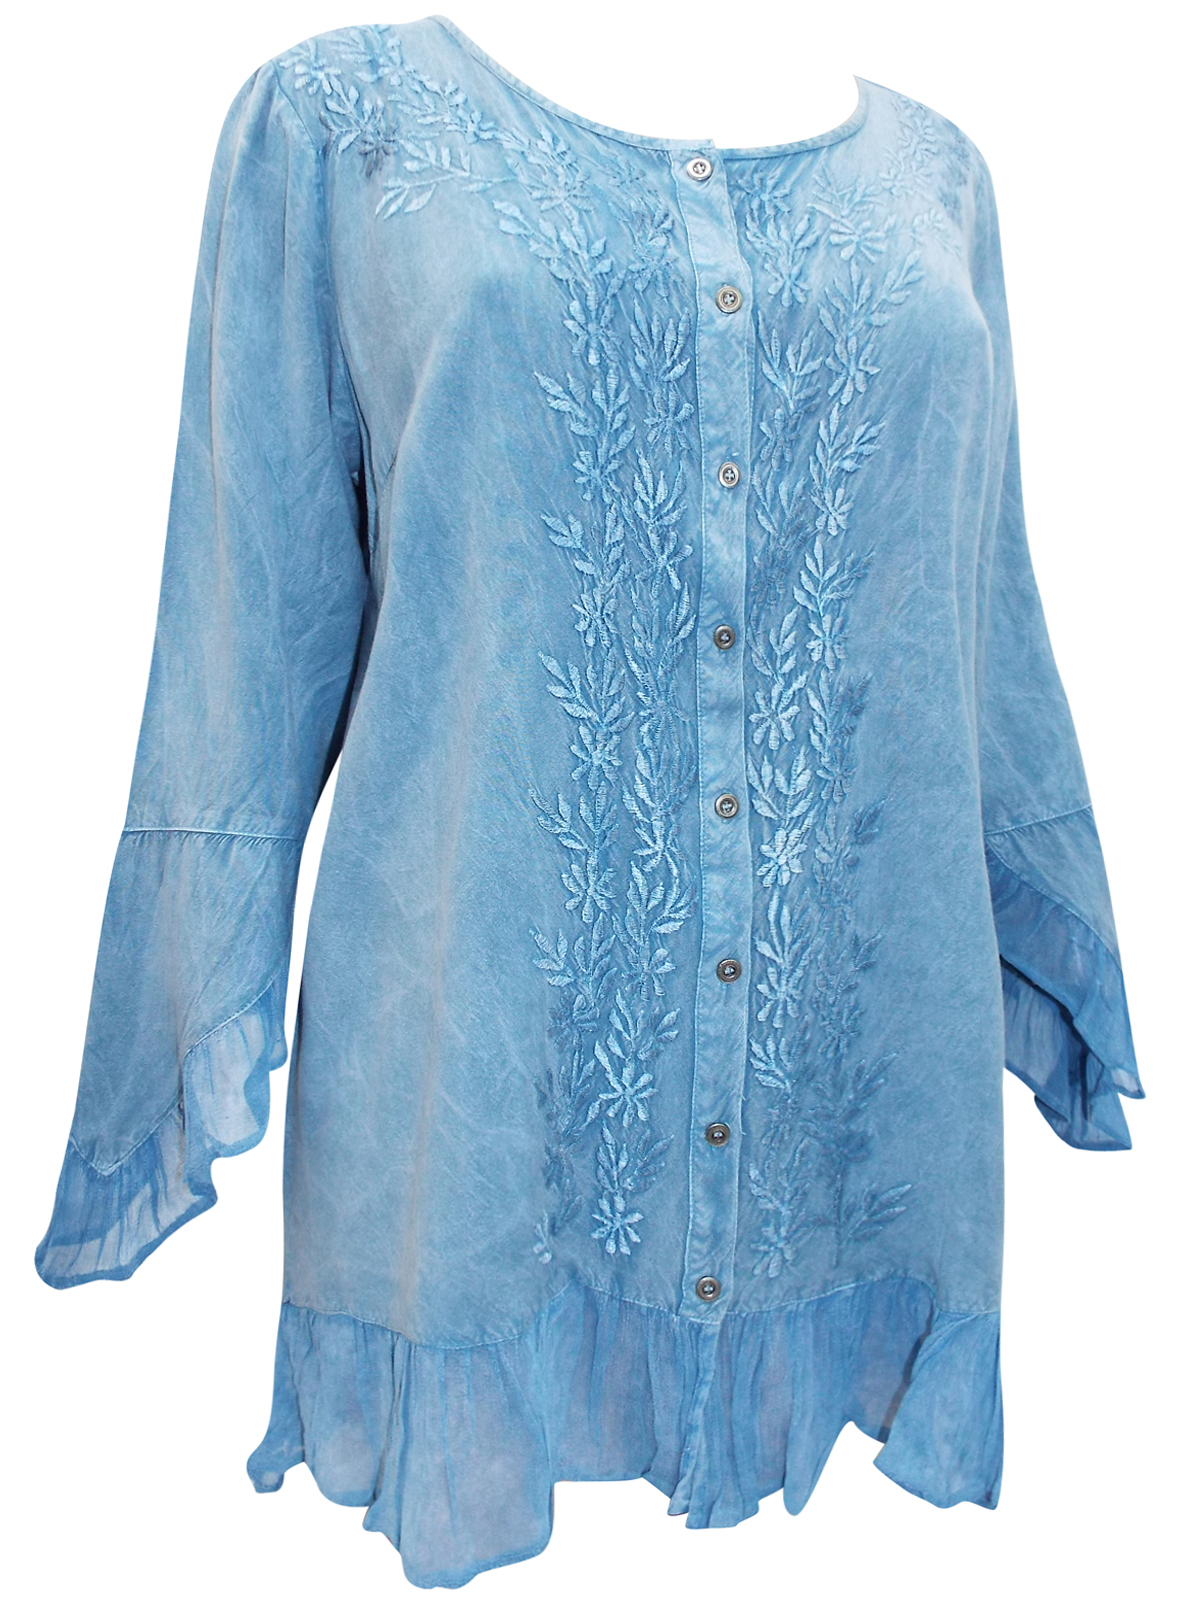 eaonplus DENIM Enchanted Pixie Embroidered Blouse - Plus Size 18/20 to ...